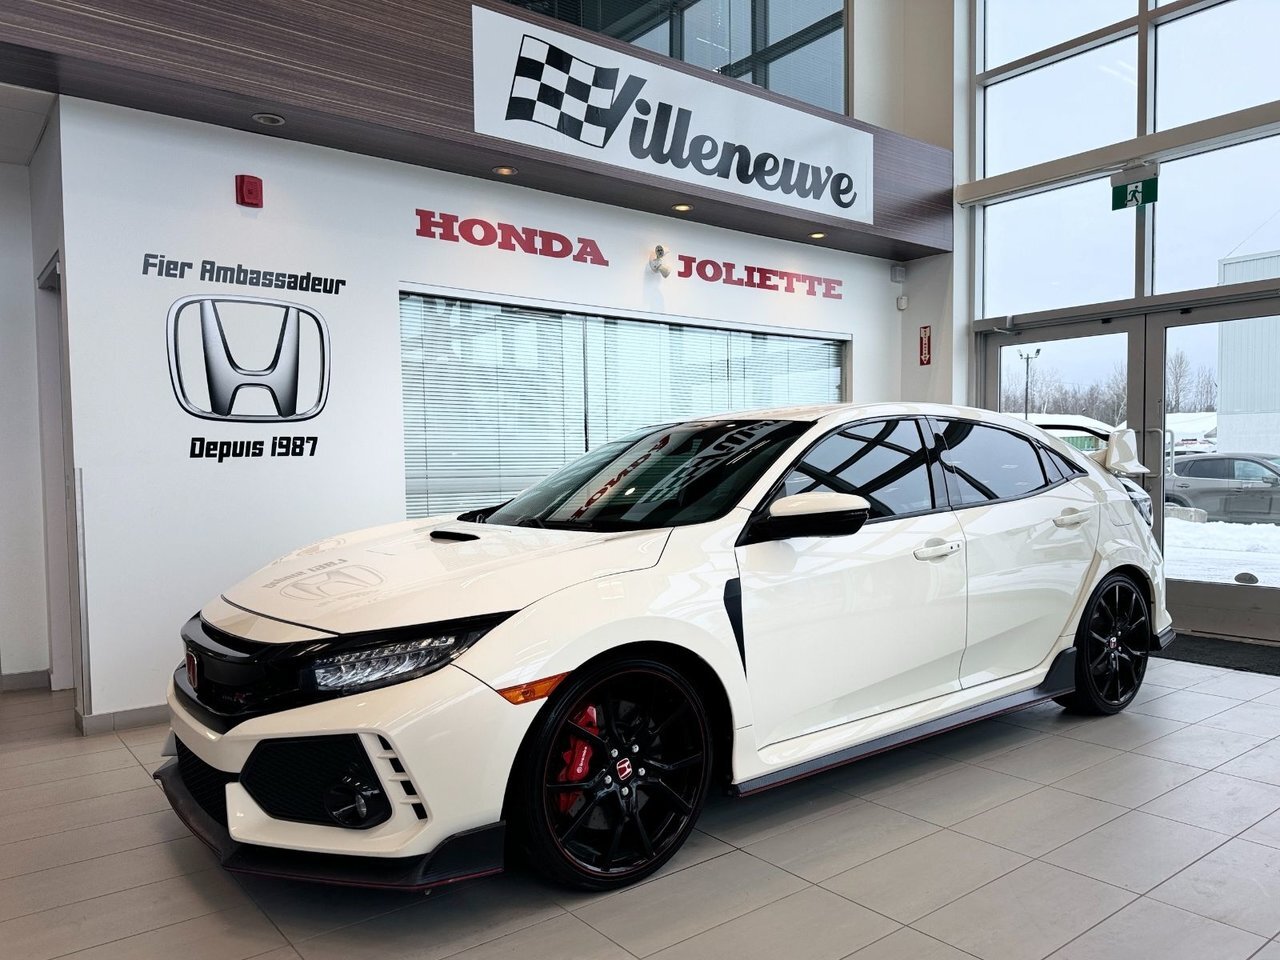 2018 Honda Civic Type R Type R | 306 HP a Real Type R | fully inspected | 